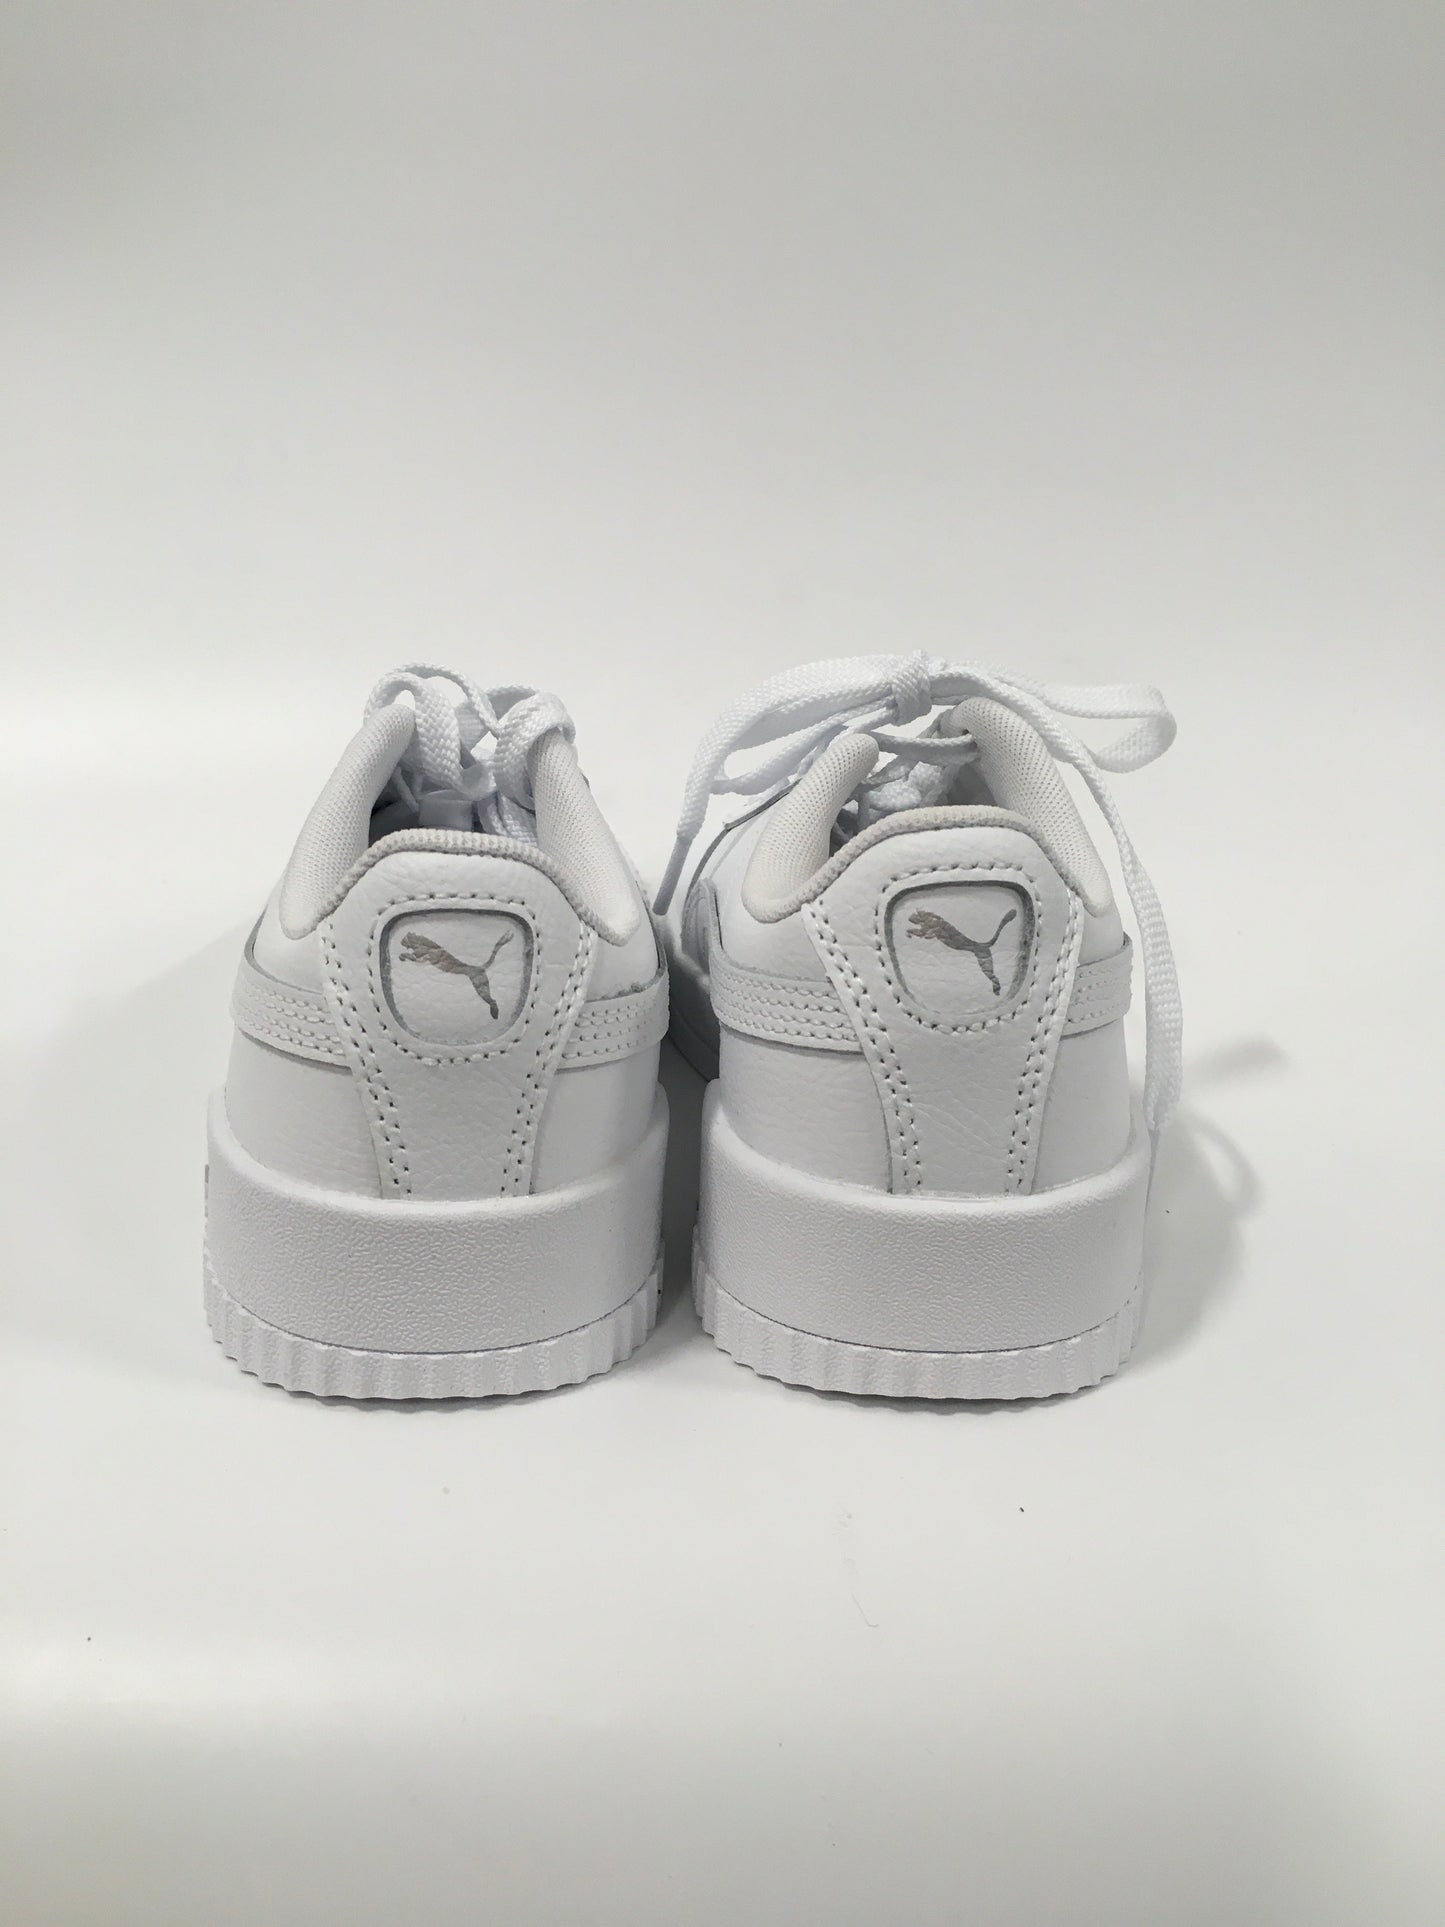 White Shoes Sneakers Puma, Size 6